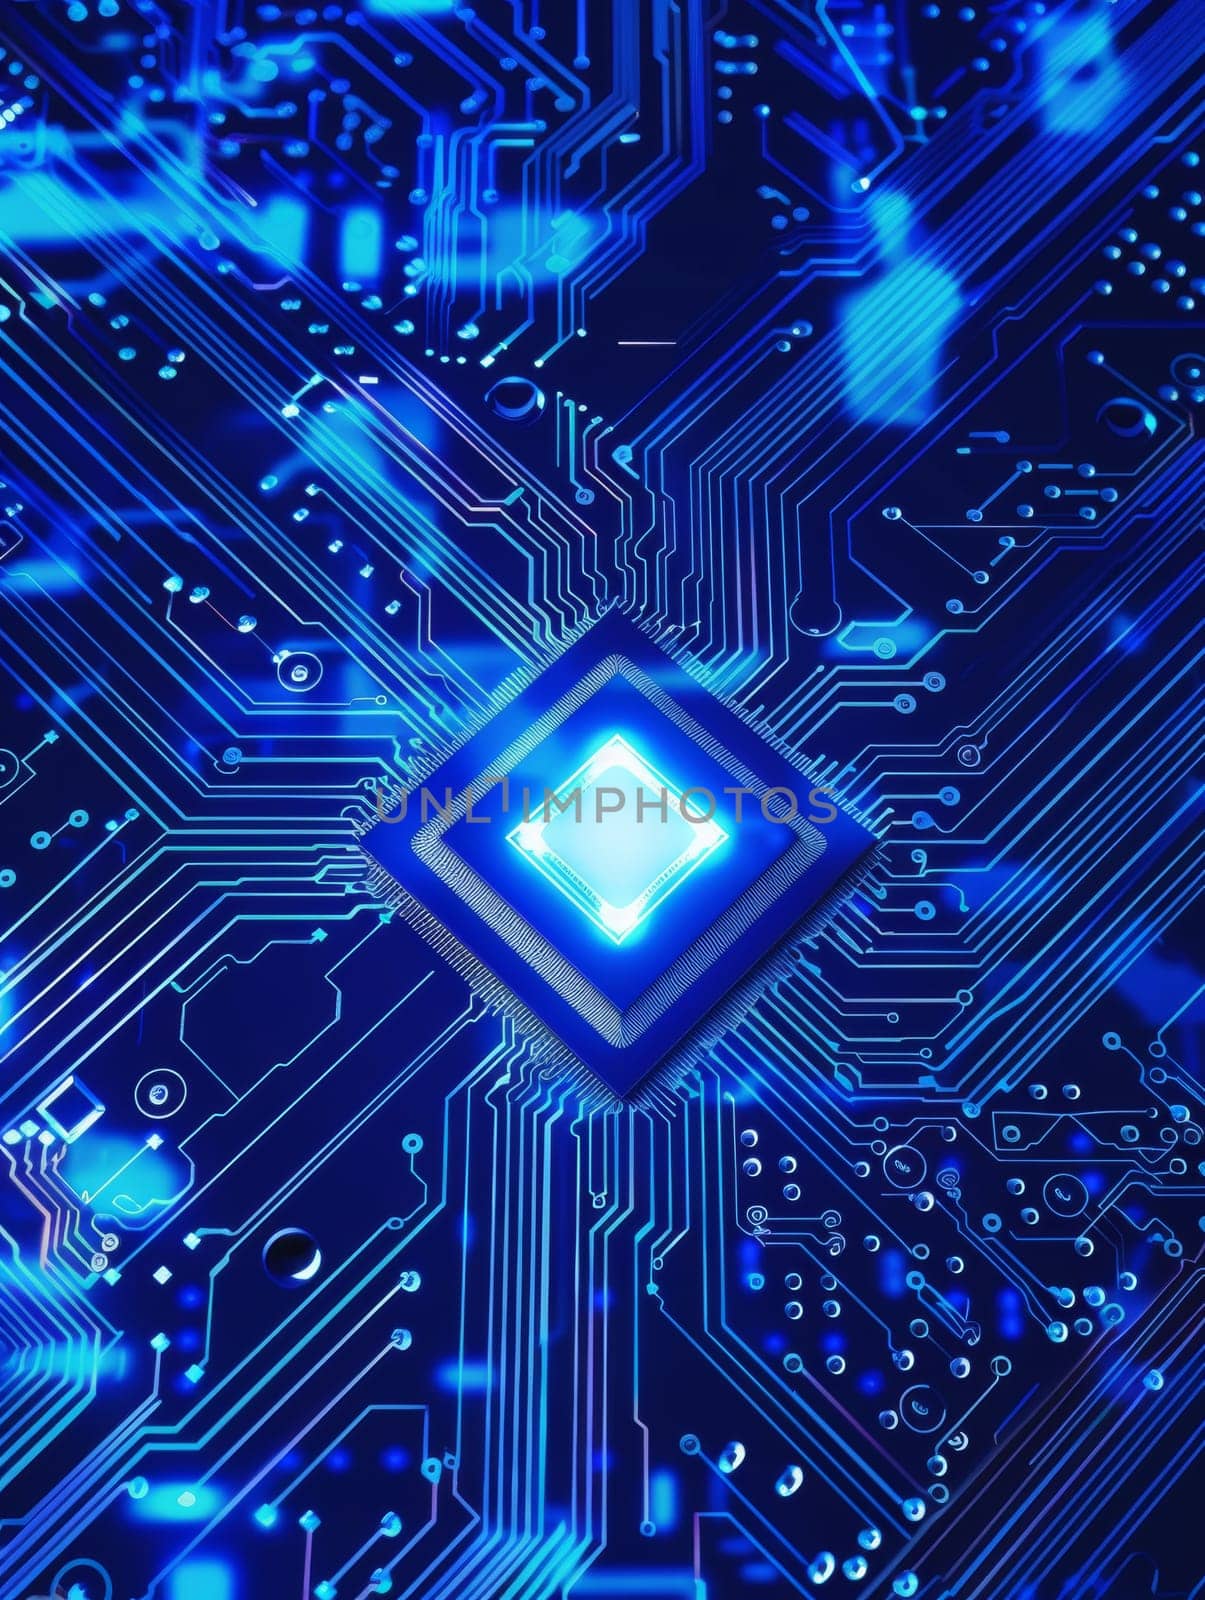 Abstract blue circuit board background with a square chip glowing in the center. Digital technology concept.